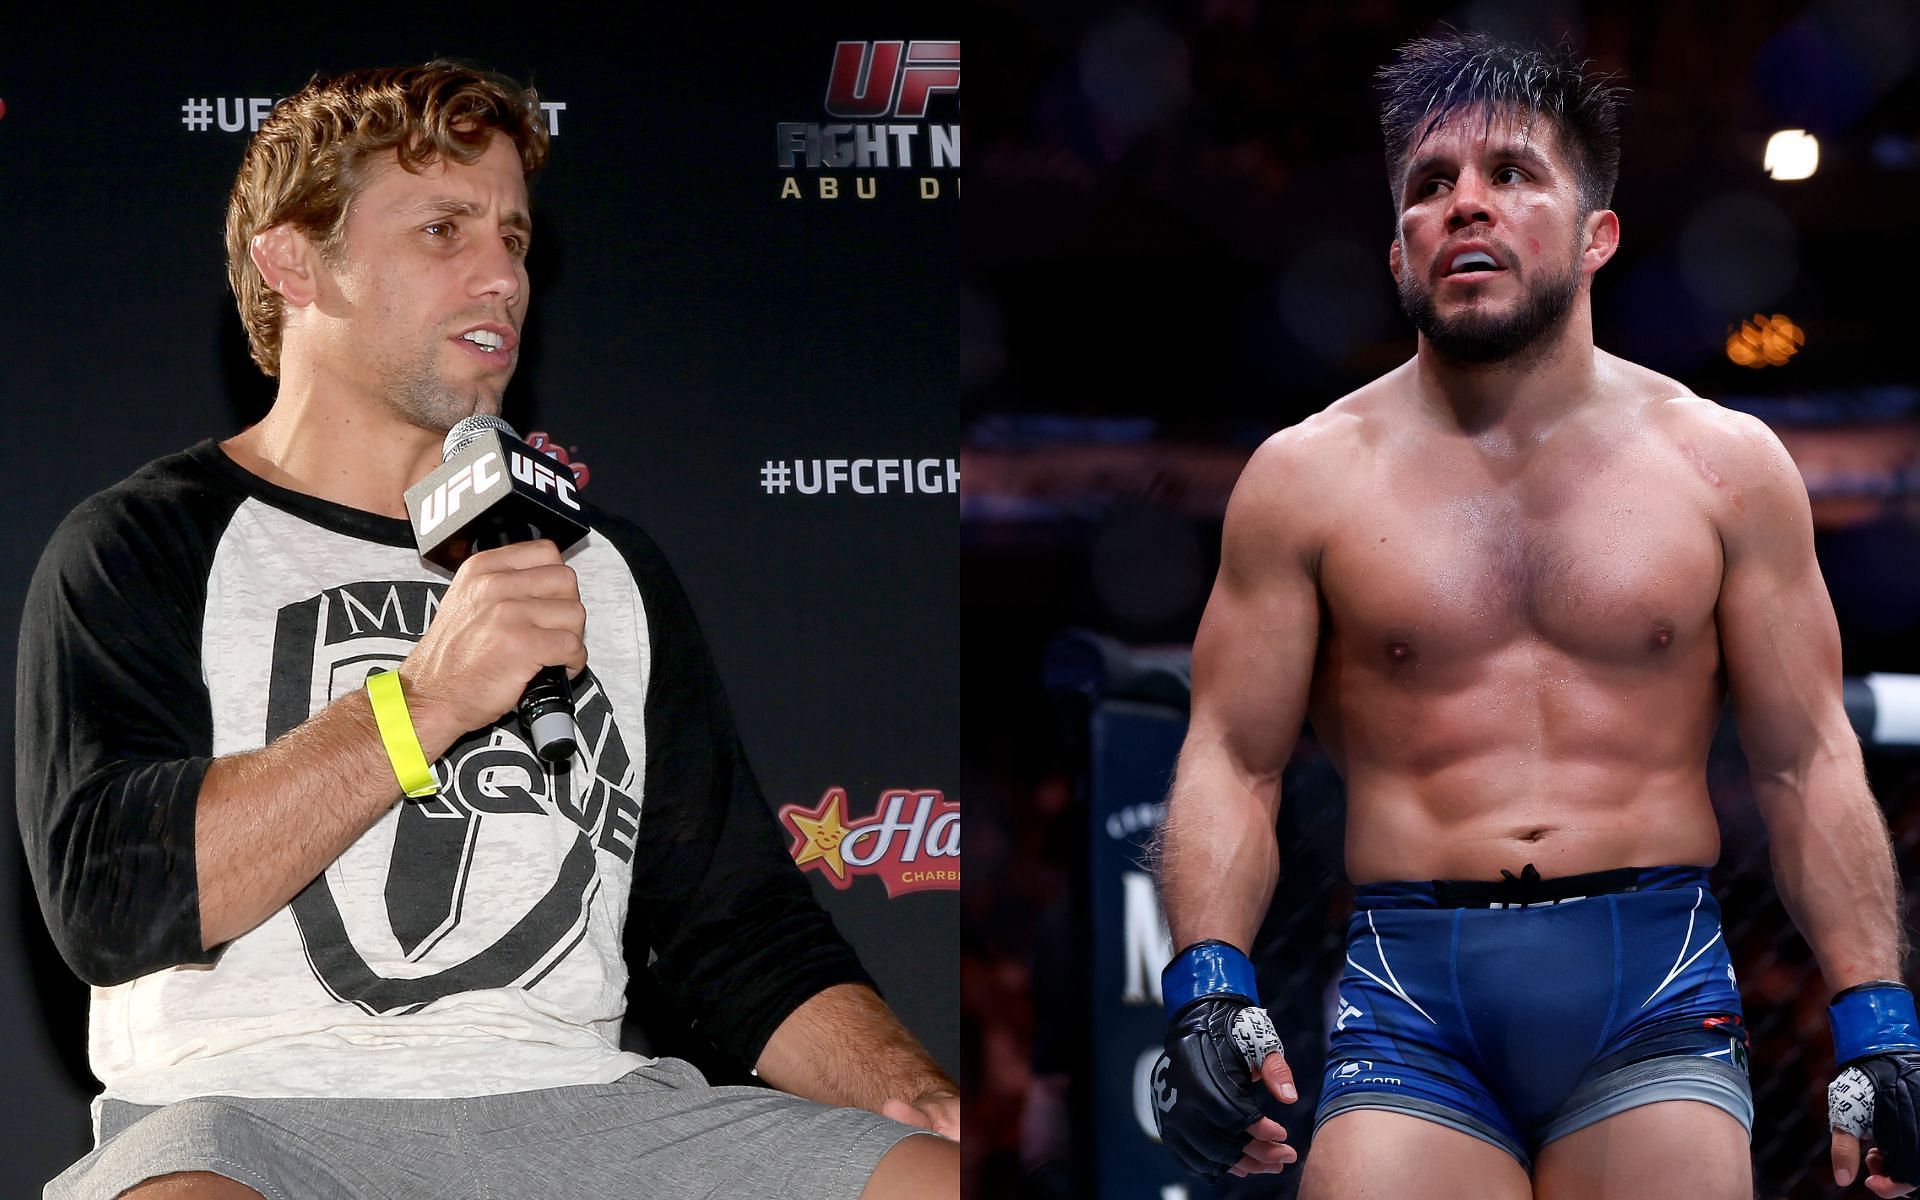 Urijah Faber (left) and Henry Cejduo (right) (Image credits Getty Images)